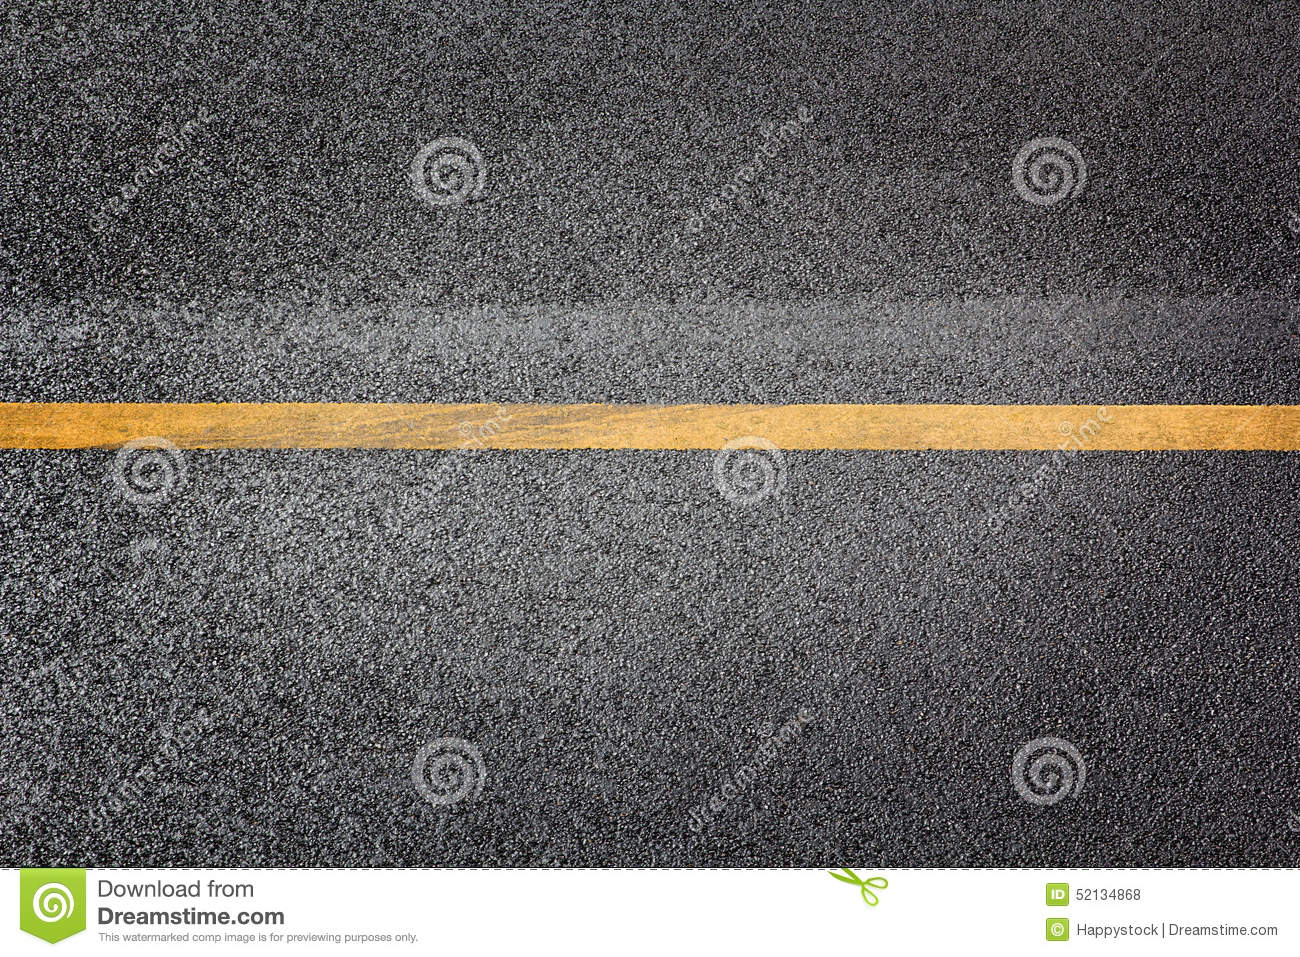 Top View Road Highway Surface With Single Yellow Line Asphalt Backdrop    